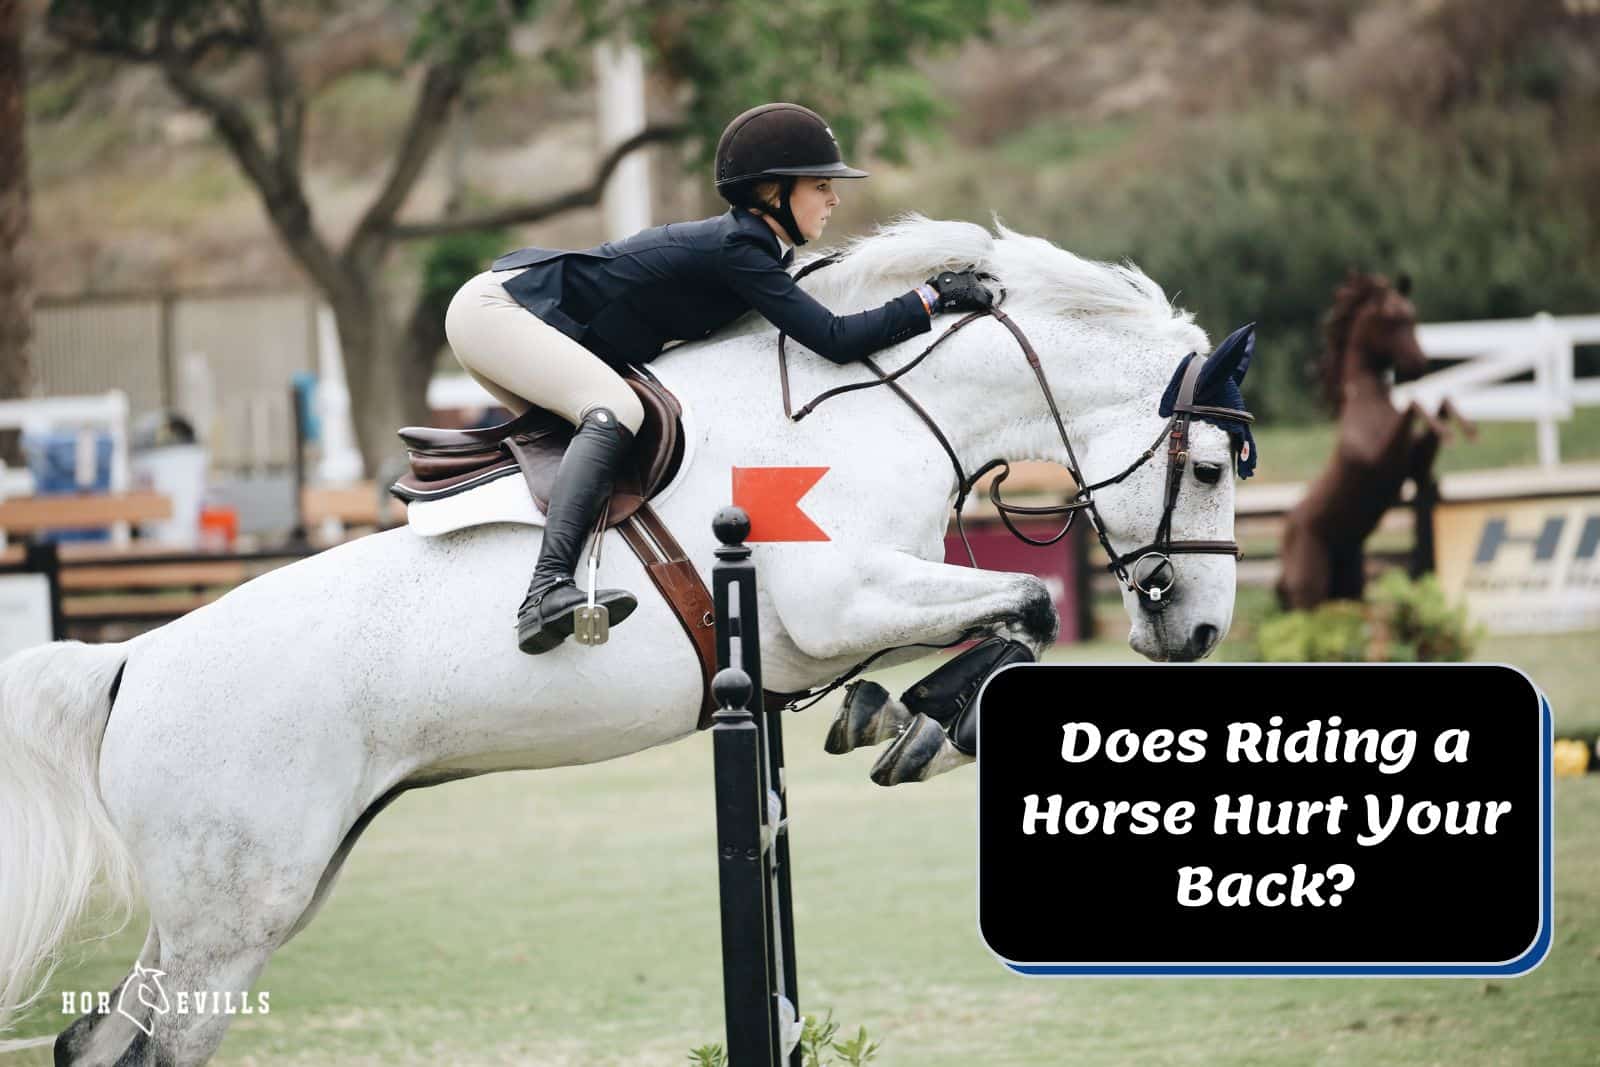 woman riding a jumping horse but Does Riding a Horse Hurt Your Back?